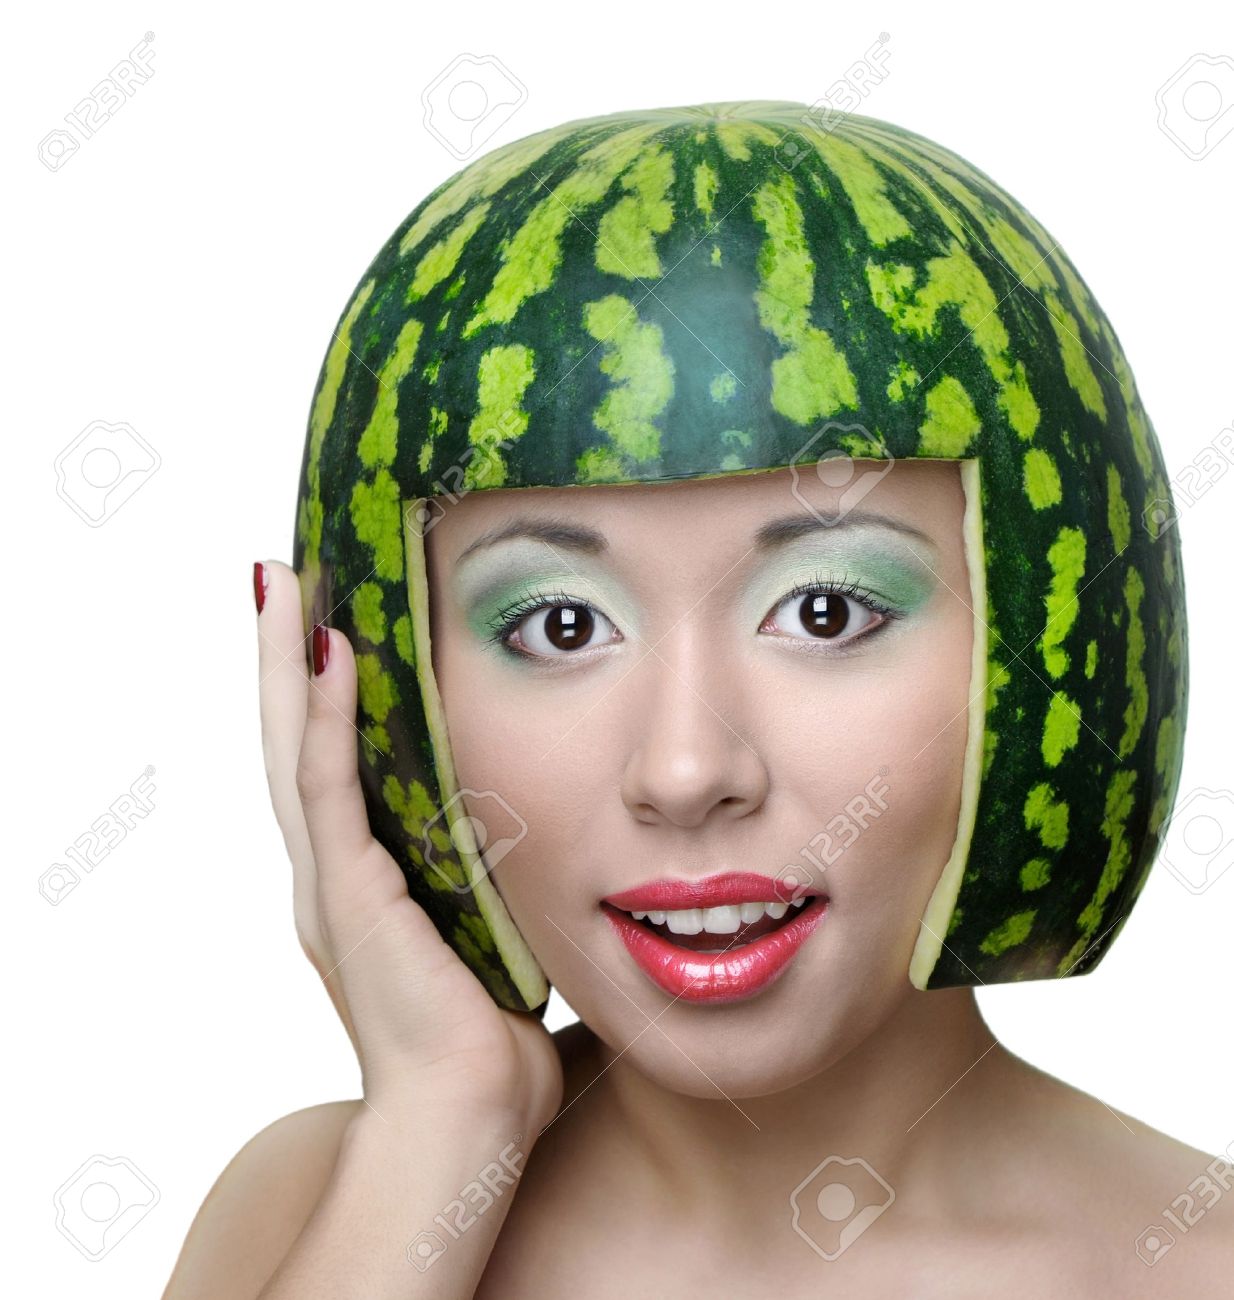 Funny Woman With Watermelon Helmet